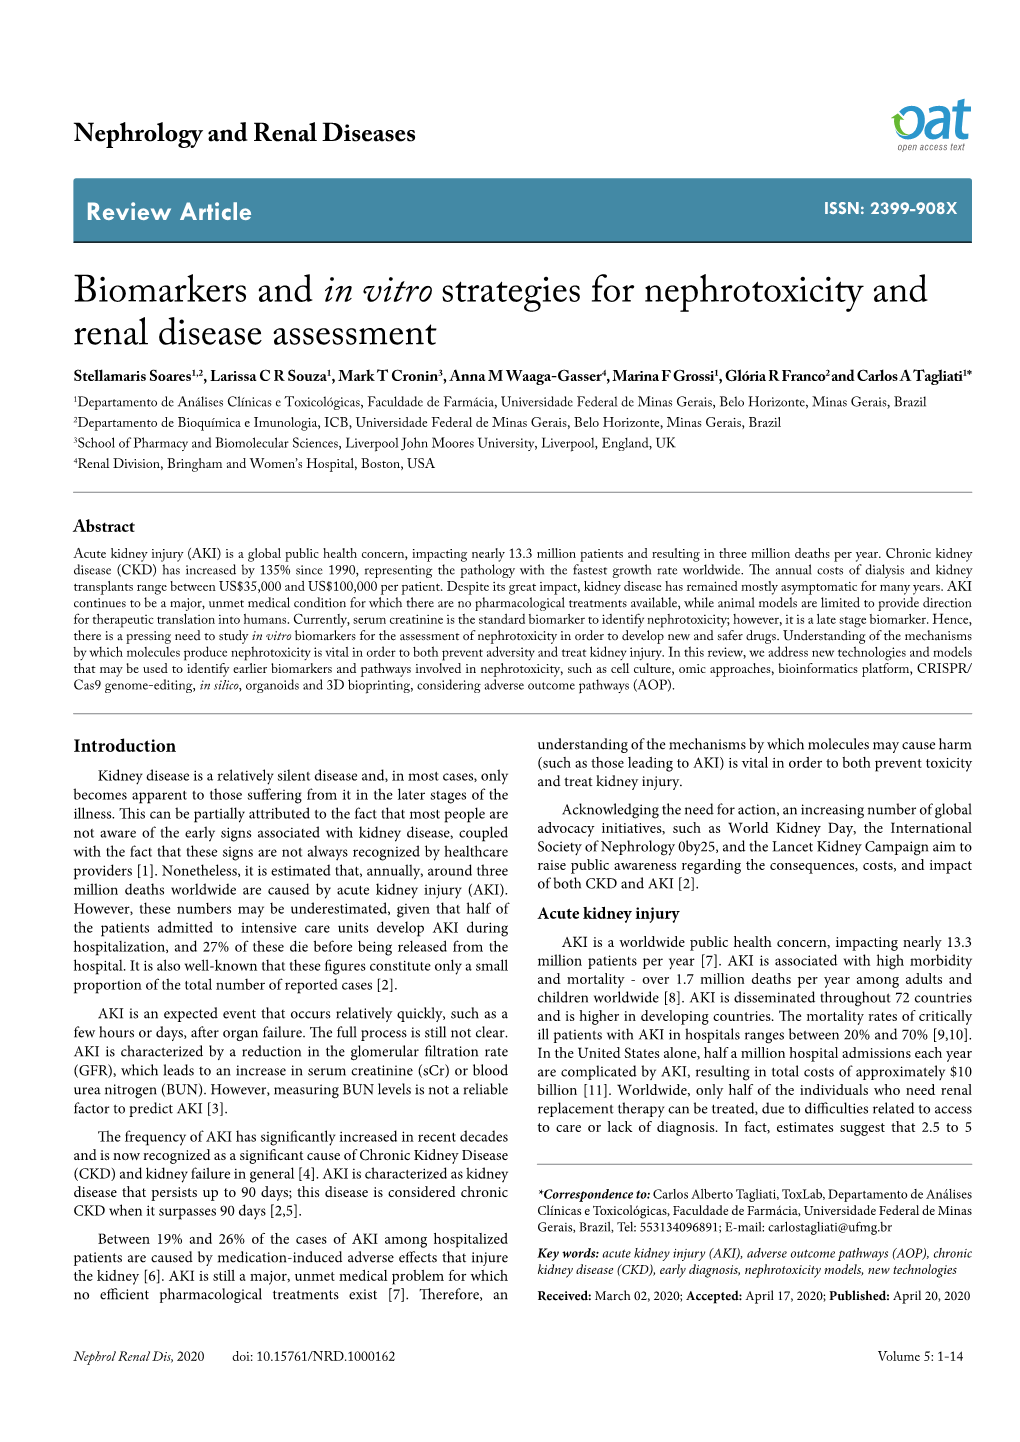 Biomarkers and in Vitro Strategies for Nephrotoxicity and Renal Disease